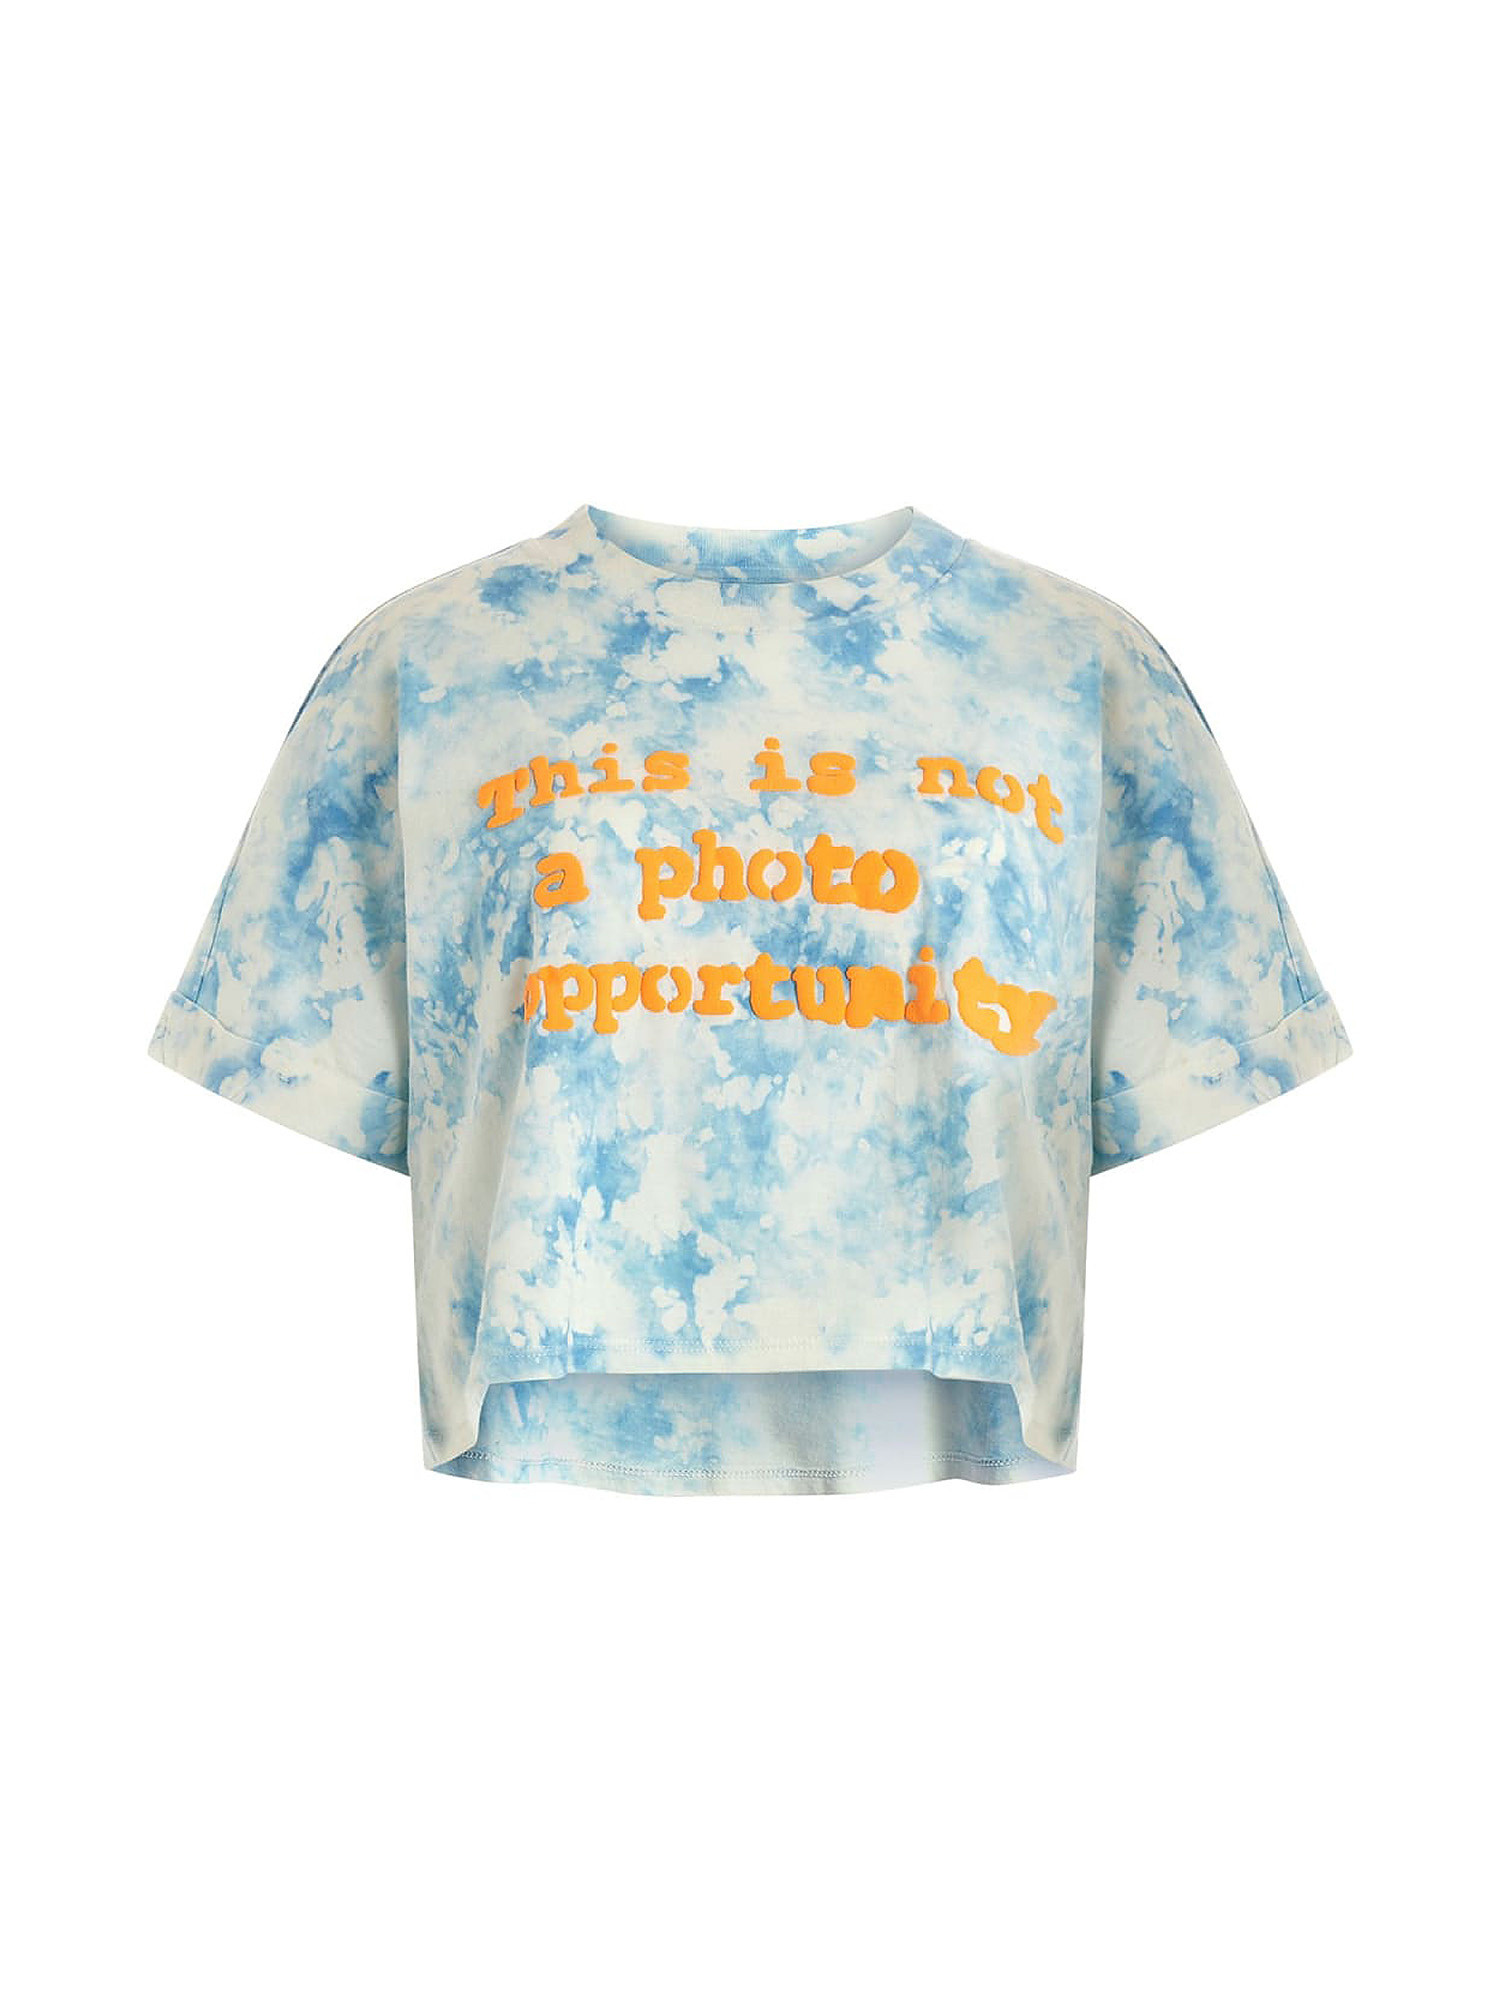 GUESS - Tie-dye T-shirt, Light Blue, large image number 0